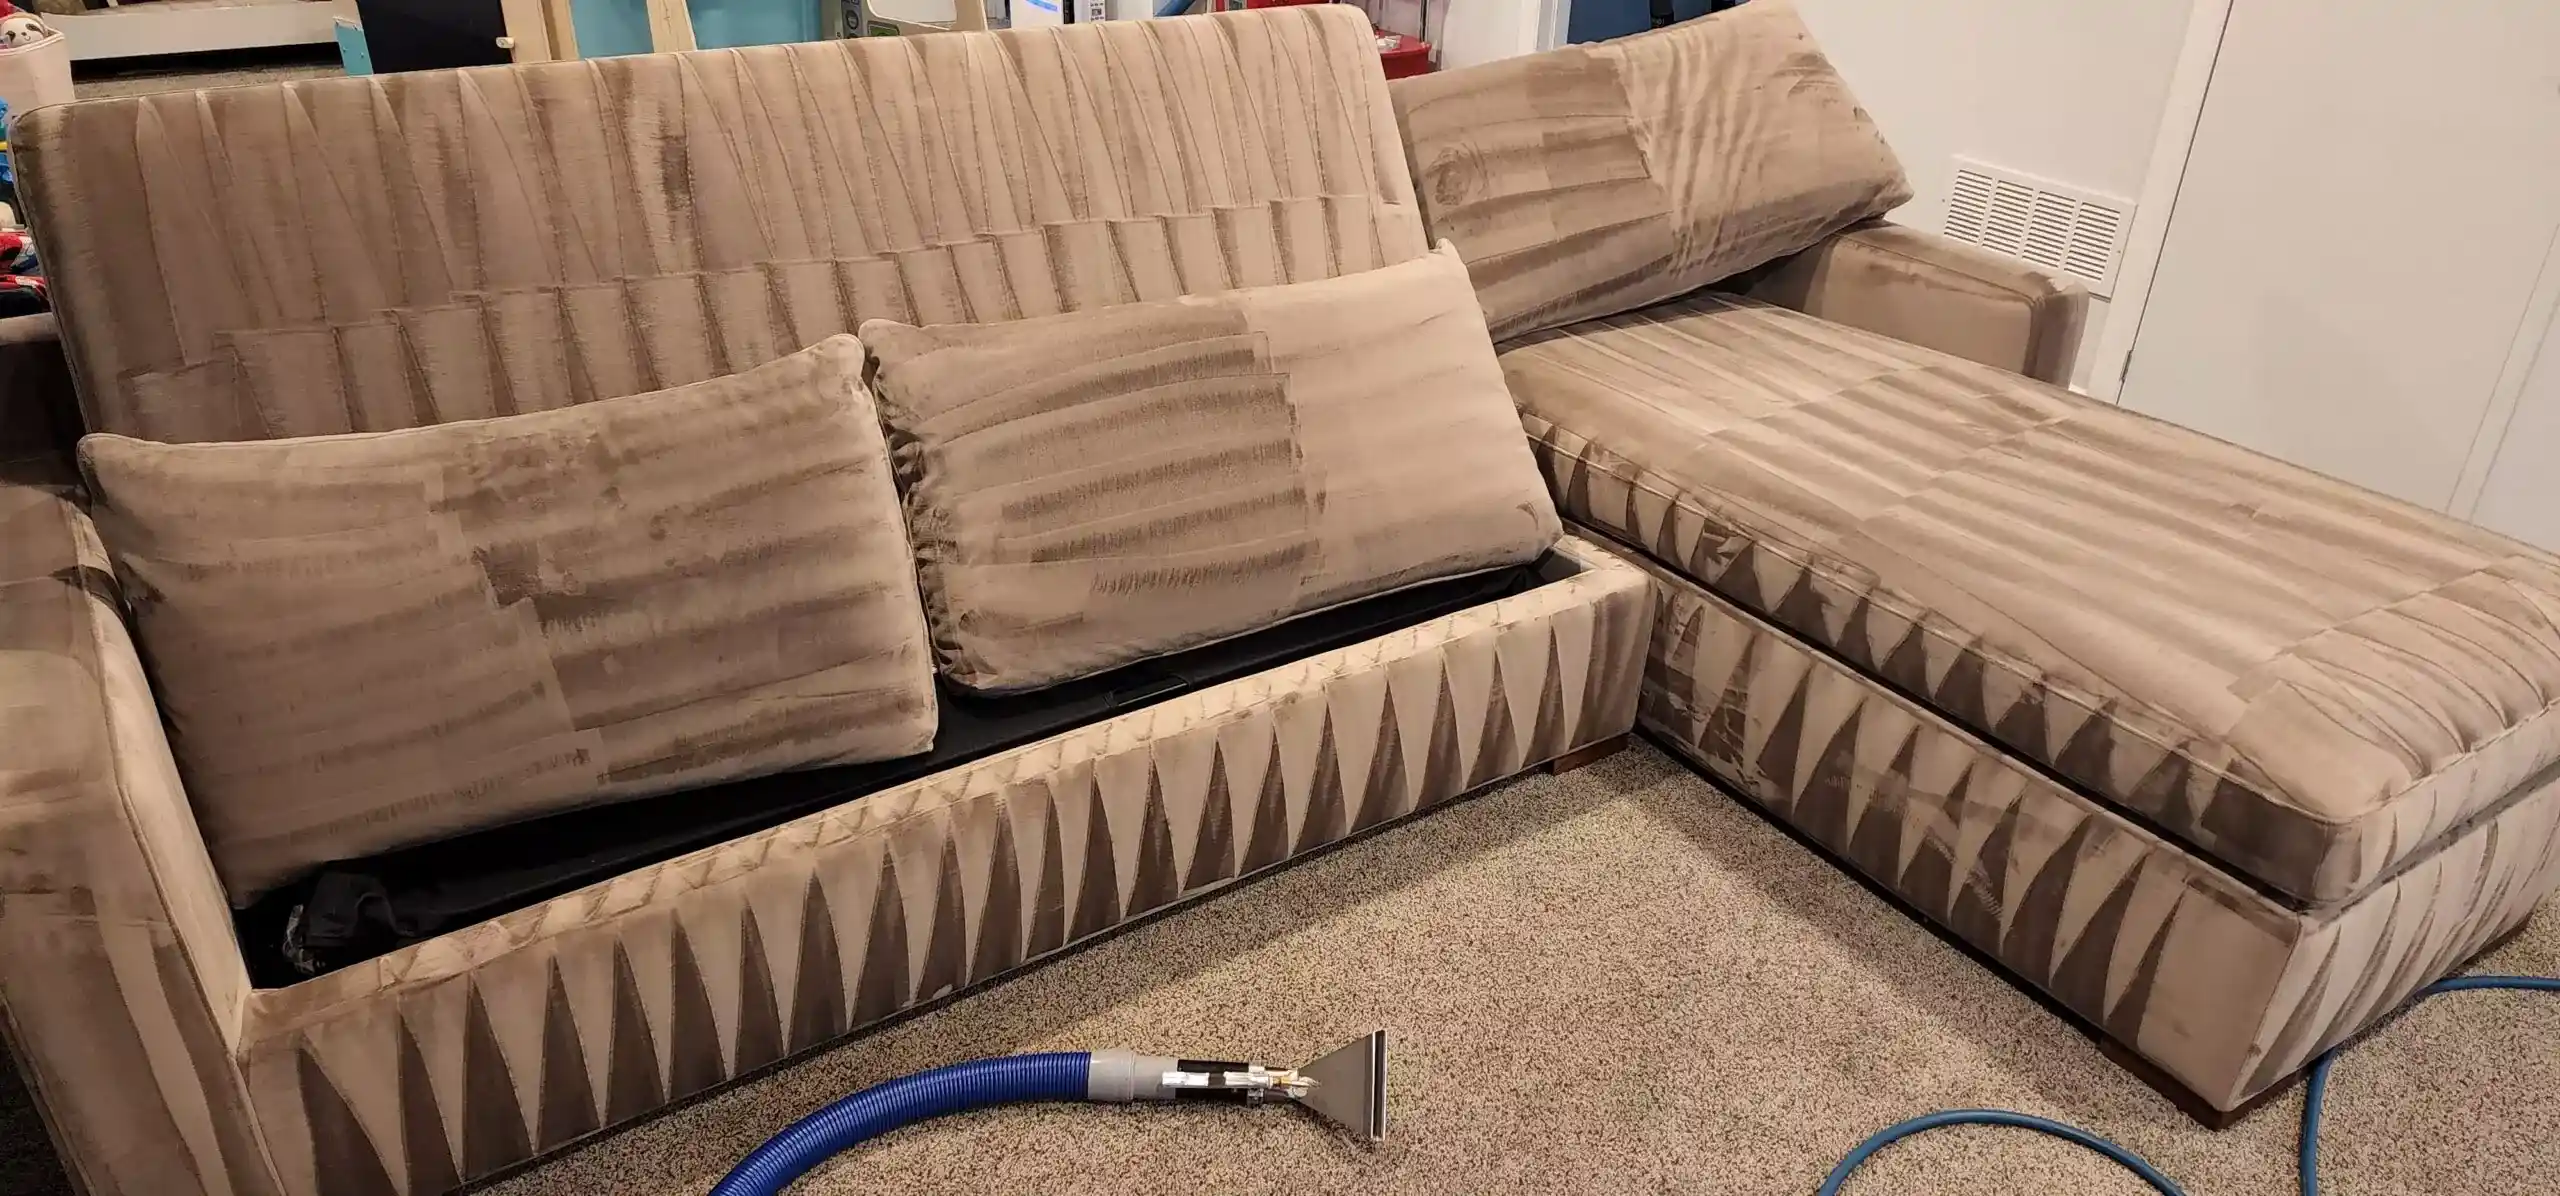 Upholstery-cleaning-services